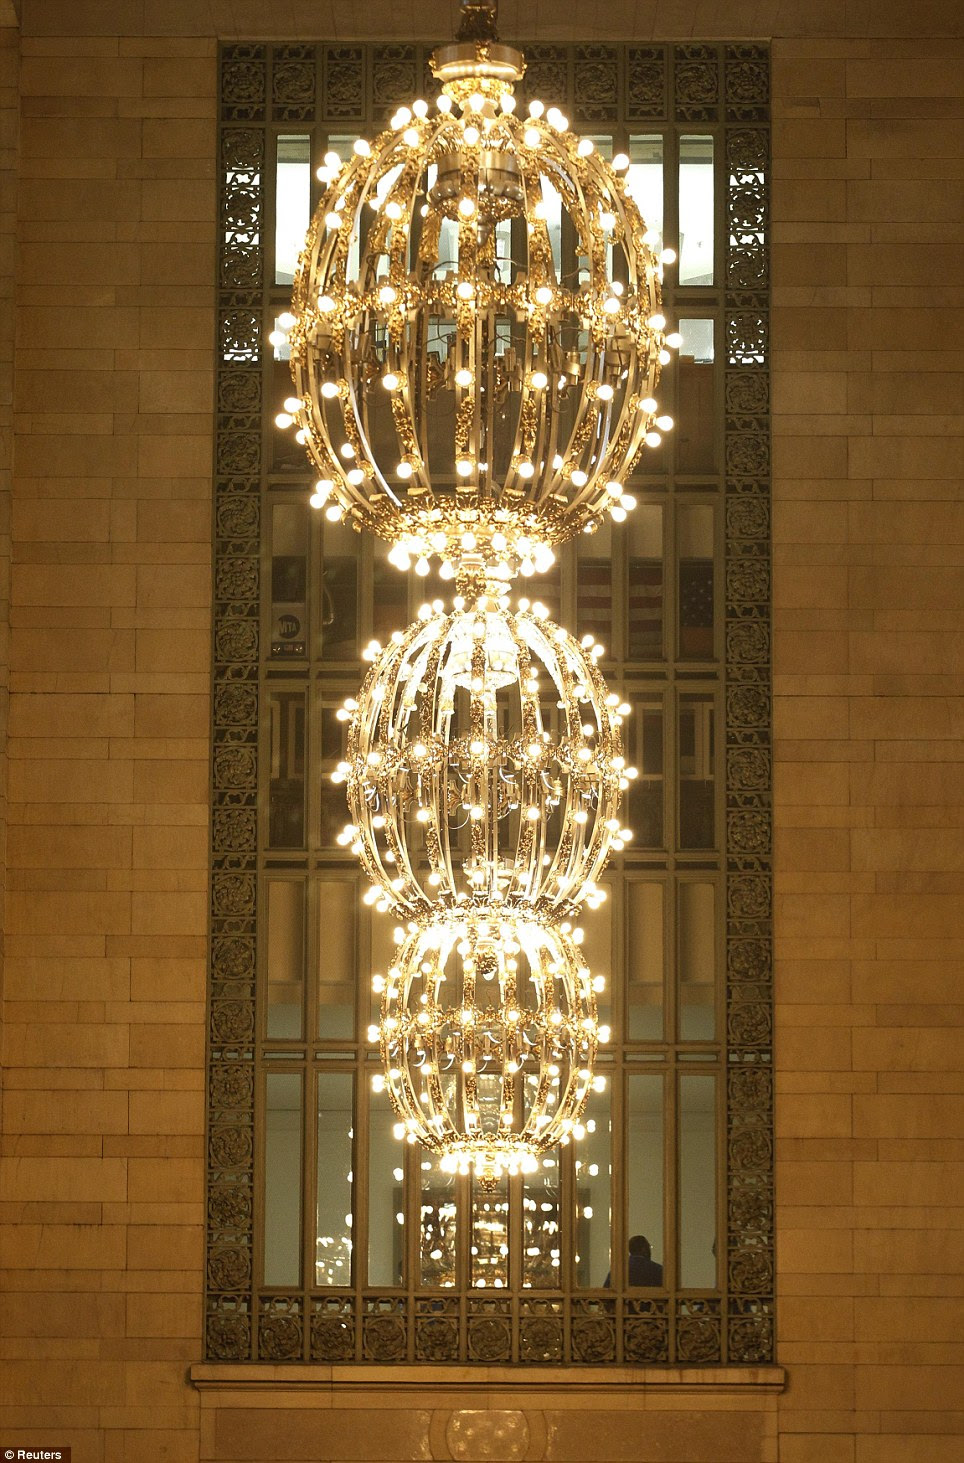 A large gold plated chandeliers hangs off the main concourse